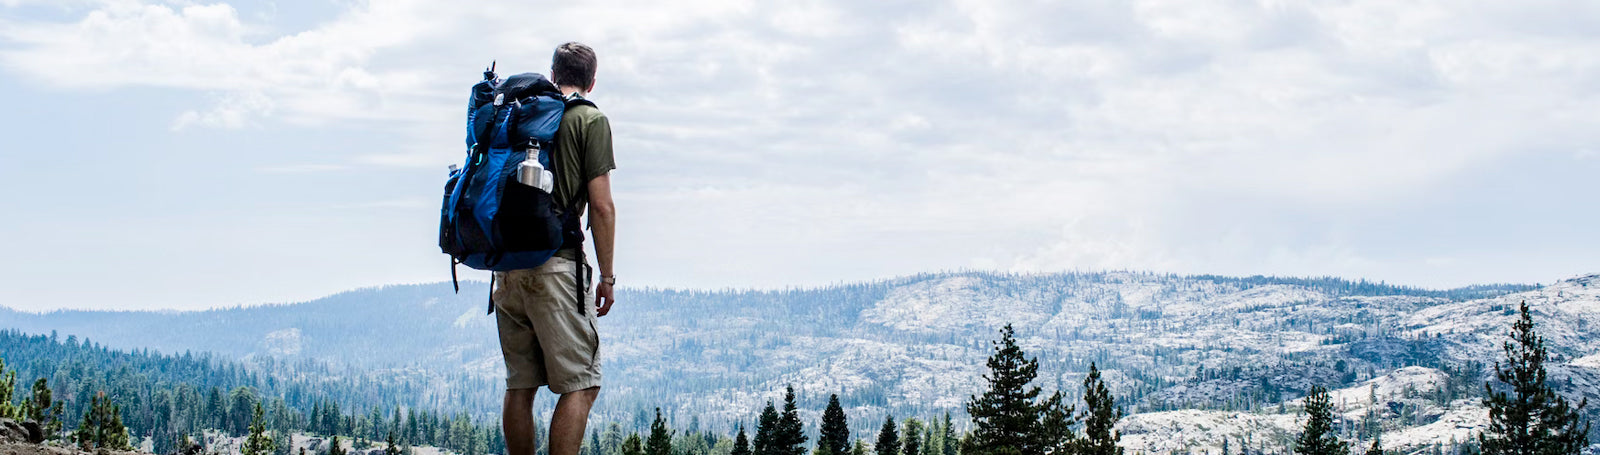 Man standing on hill looking out over pine trees and mountains